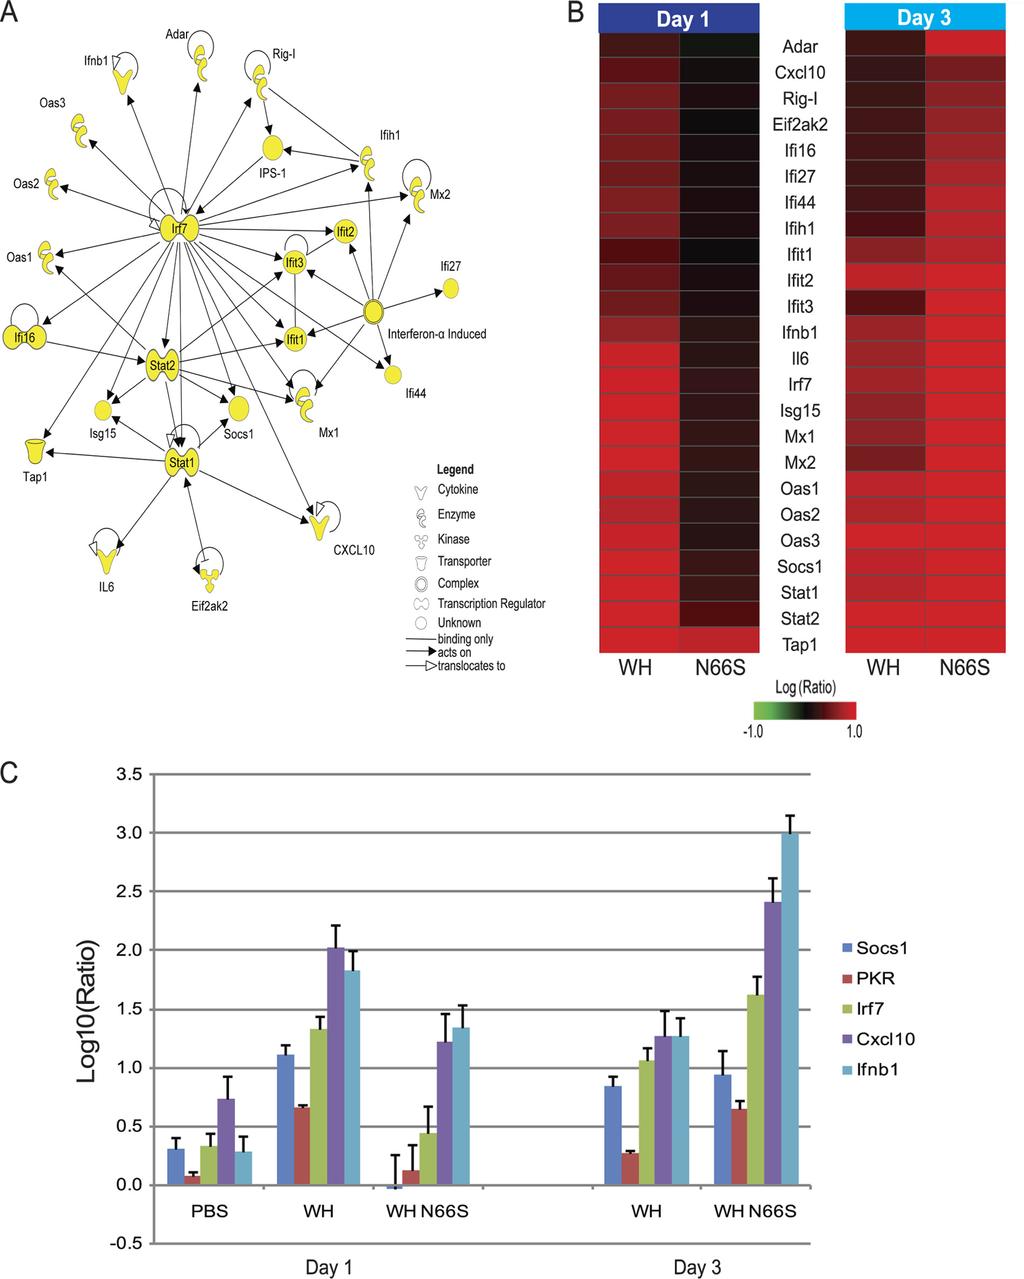 656 CONENELLO ET AL. J. VIROL. FIG. 2. Interferon-stimulated response genes distinguish WH and WH N66S infection groups at days 1 and 3 postinfection.